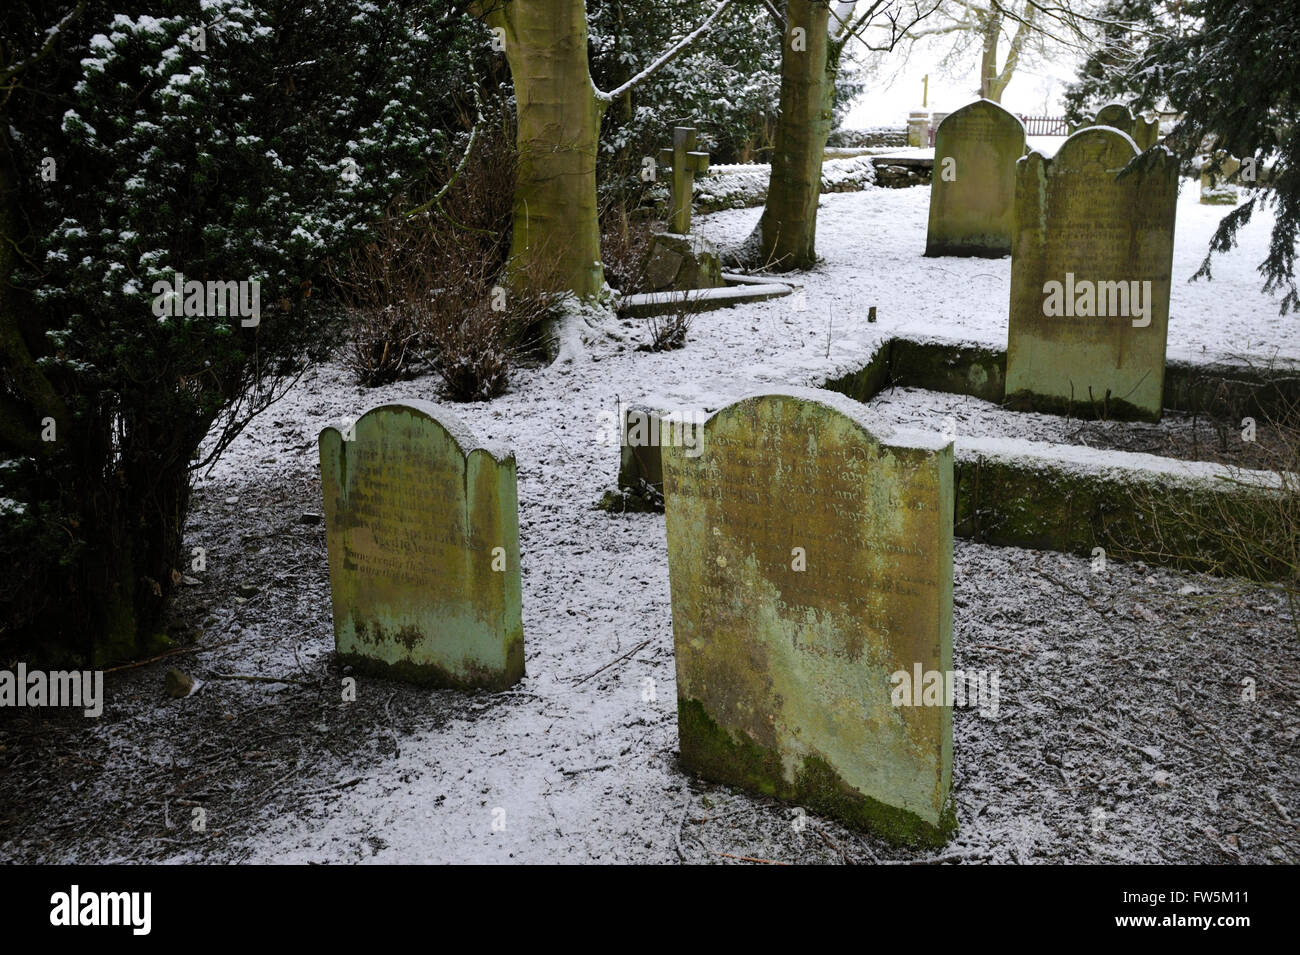 the tombs under snow of John Cuthbert Dobson, aged 9, in the furthest corner of the graveyard in Bowes, on the Yorkshire Moors (now in Co. Durham), by the A66, lying next George Ashton Taylor, the original of Smike, companion to Nicholas Nickleby in the novel by Charles Dickens, English author. William Shaw, headmaster, is buried along with 8 pupils from William Shaw's Academy, one of several schools in the area offering tuition 'without holidays' to unwanted children, often from London. Dickens made a special visit through thick snow in February 1838, and denounced the cruelty and appalling c Stock Photo